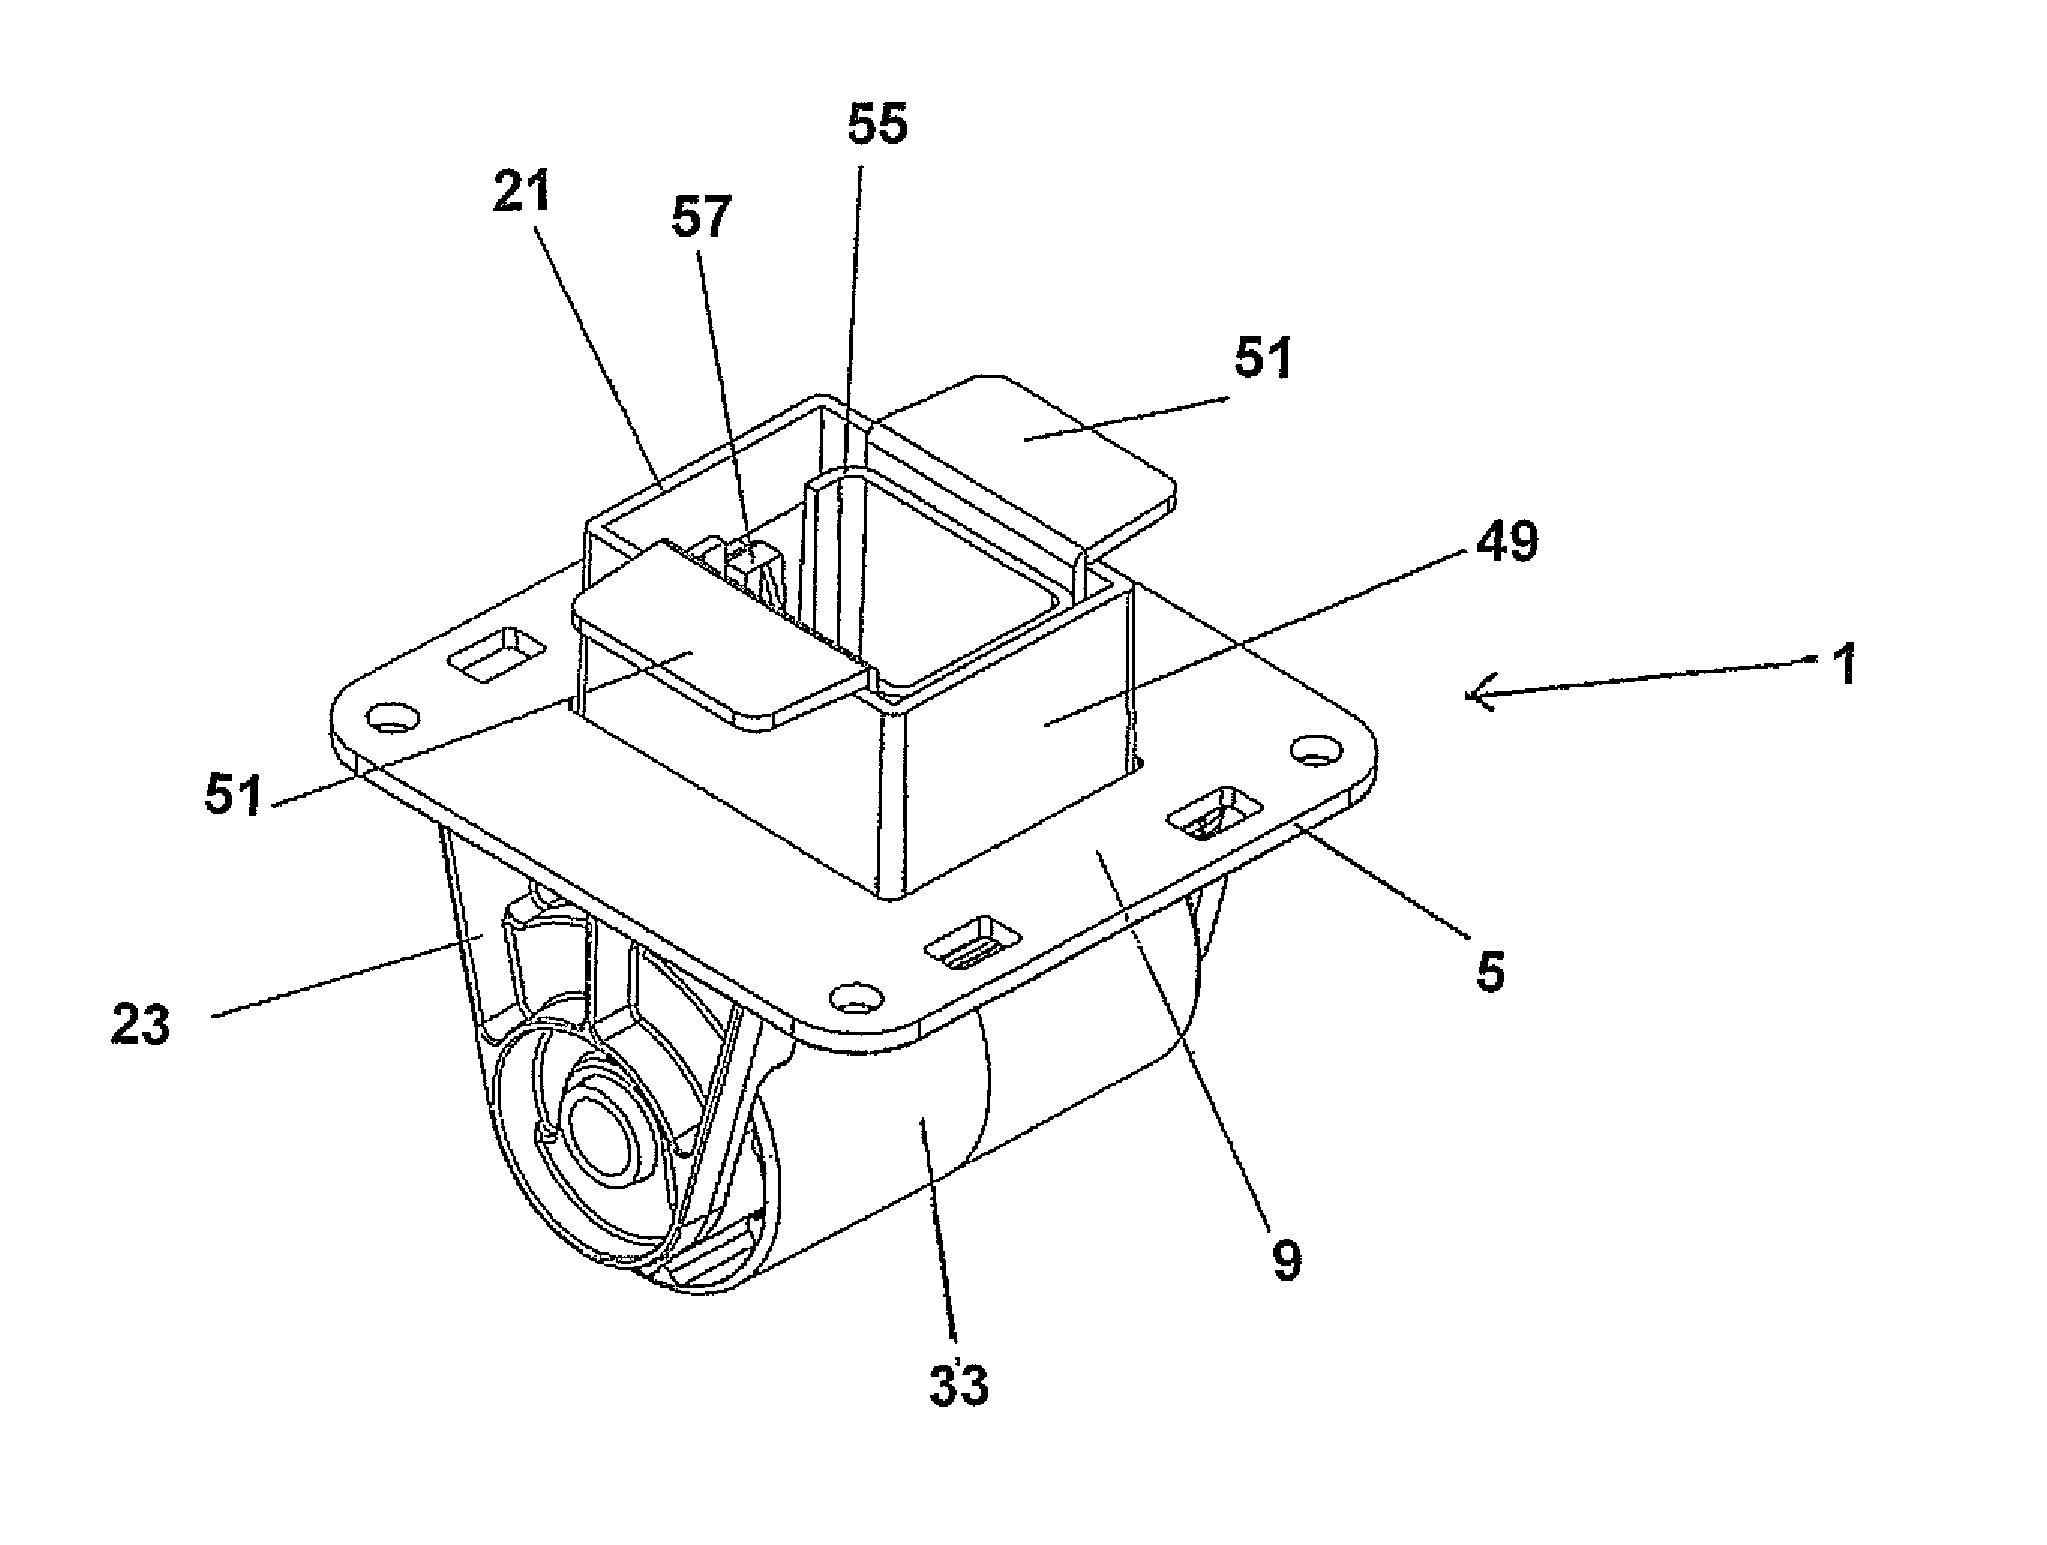 Wheeling device for a packaged article